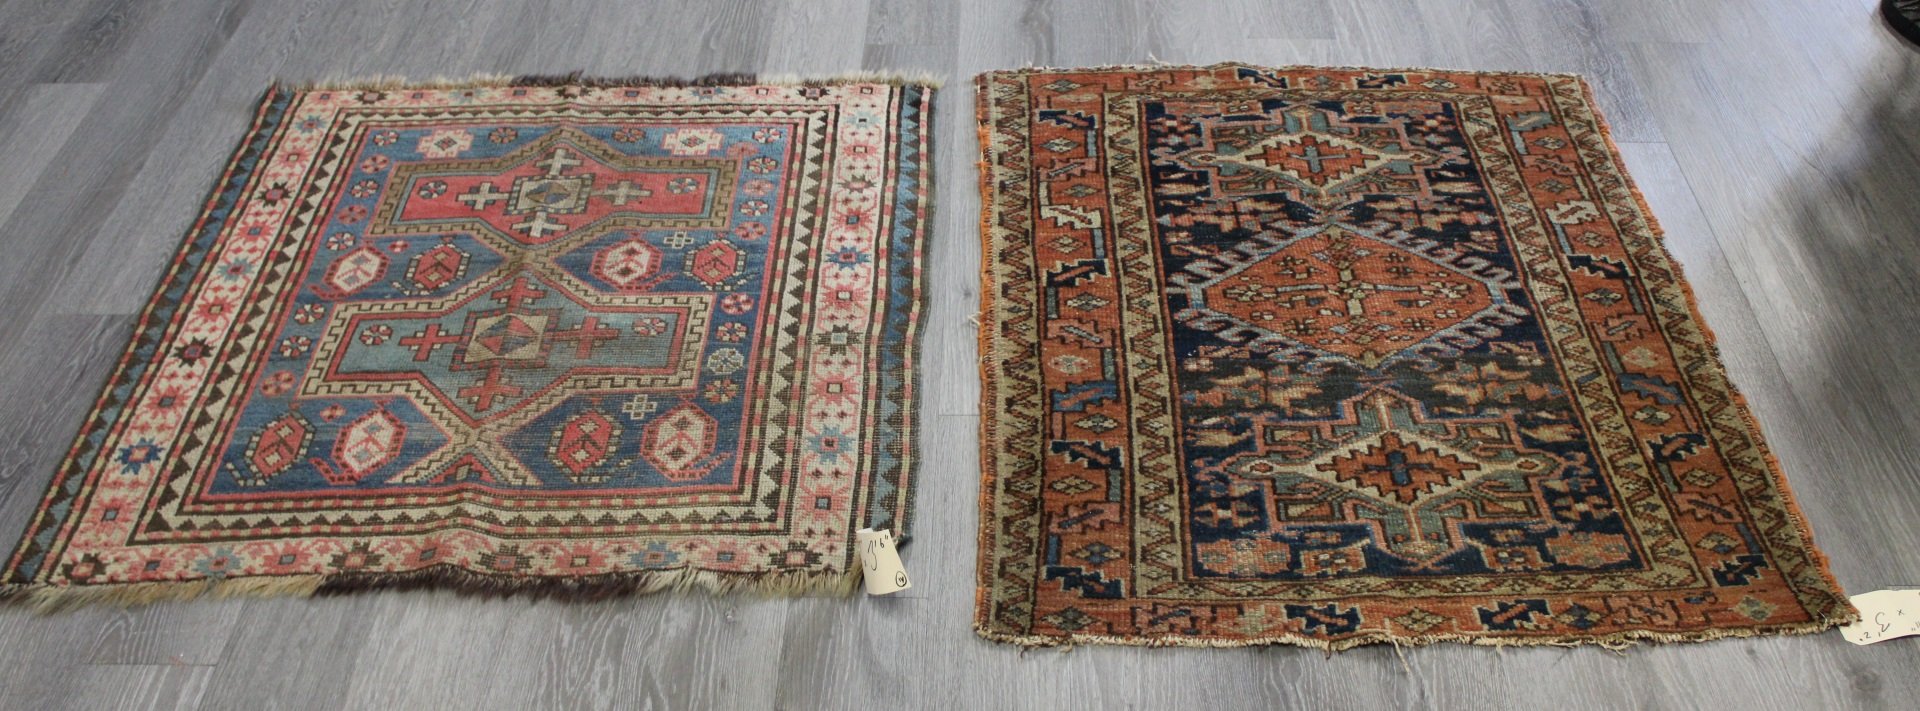 2 ANTIQUE AND FINELY HAND WOVEN 3bc468